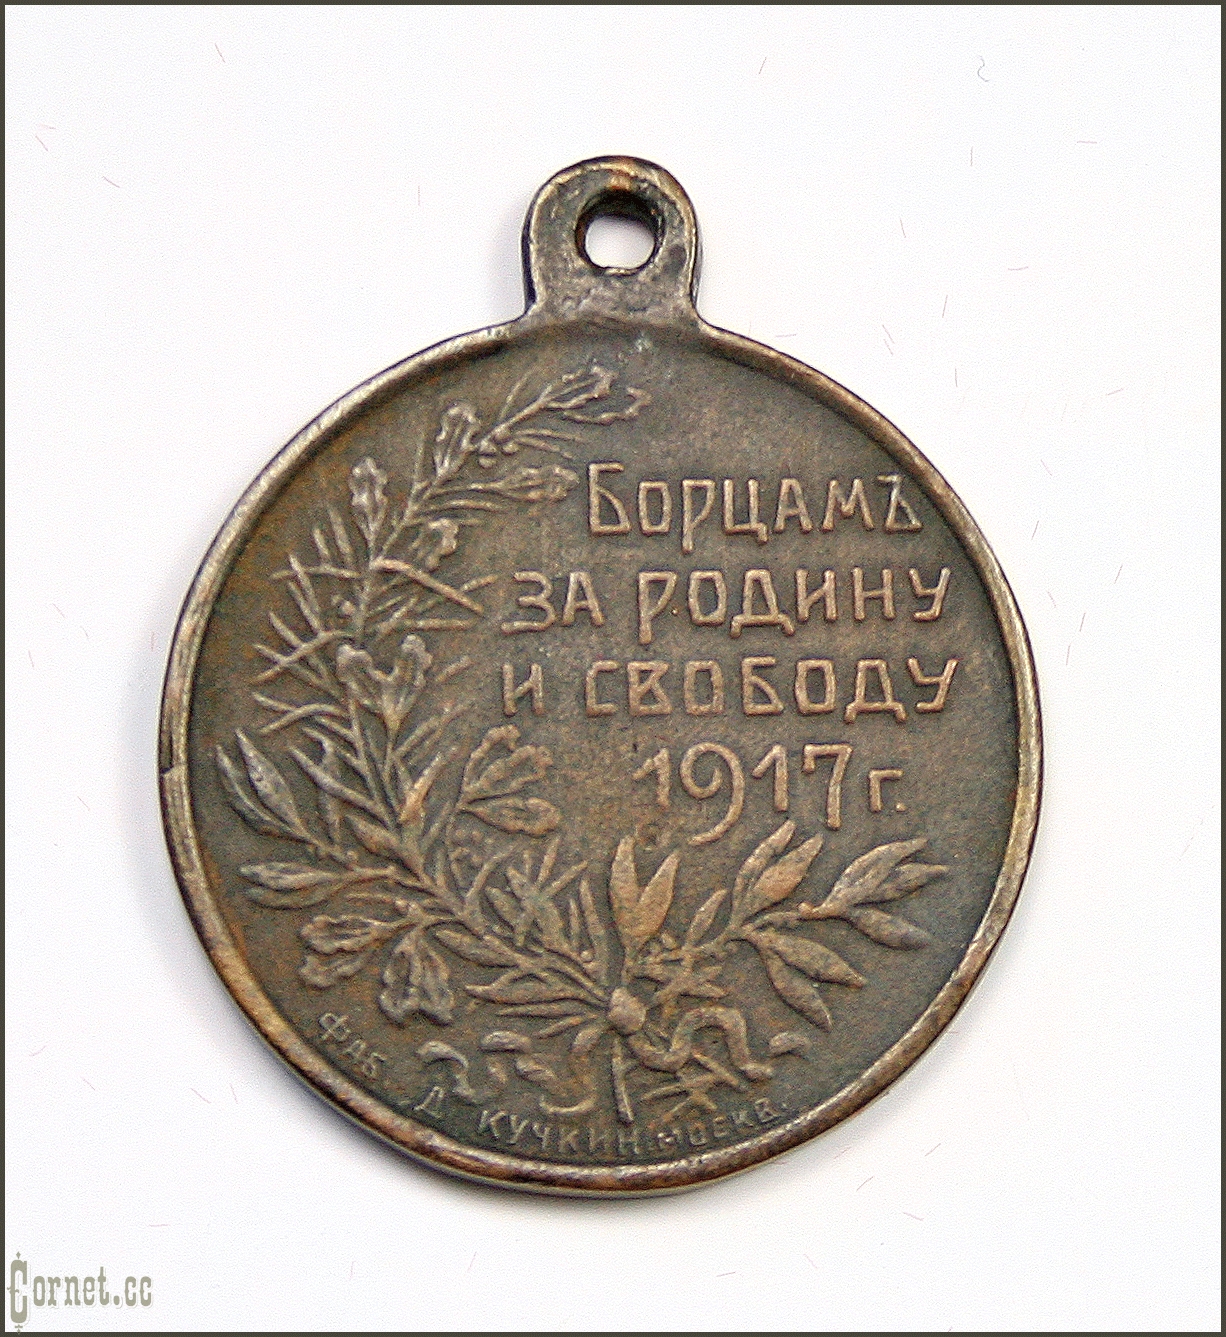 Medal "Fighters for Homeland and Freedom 1917"